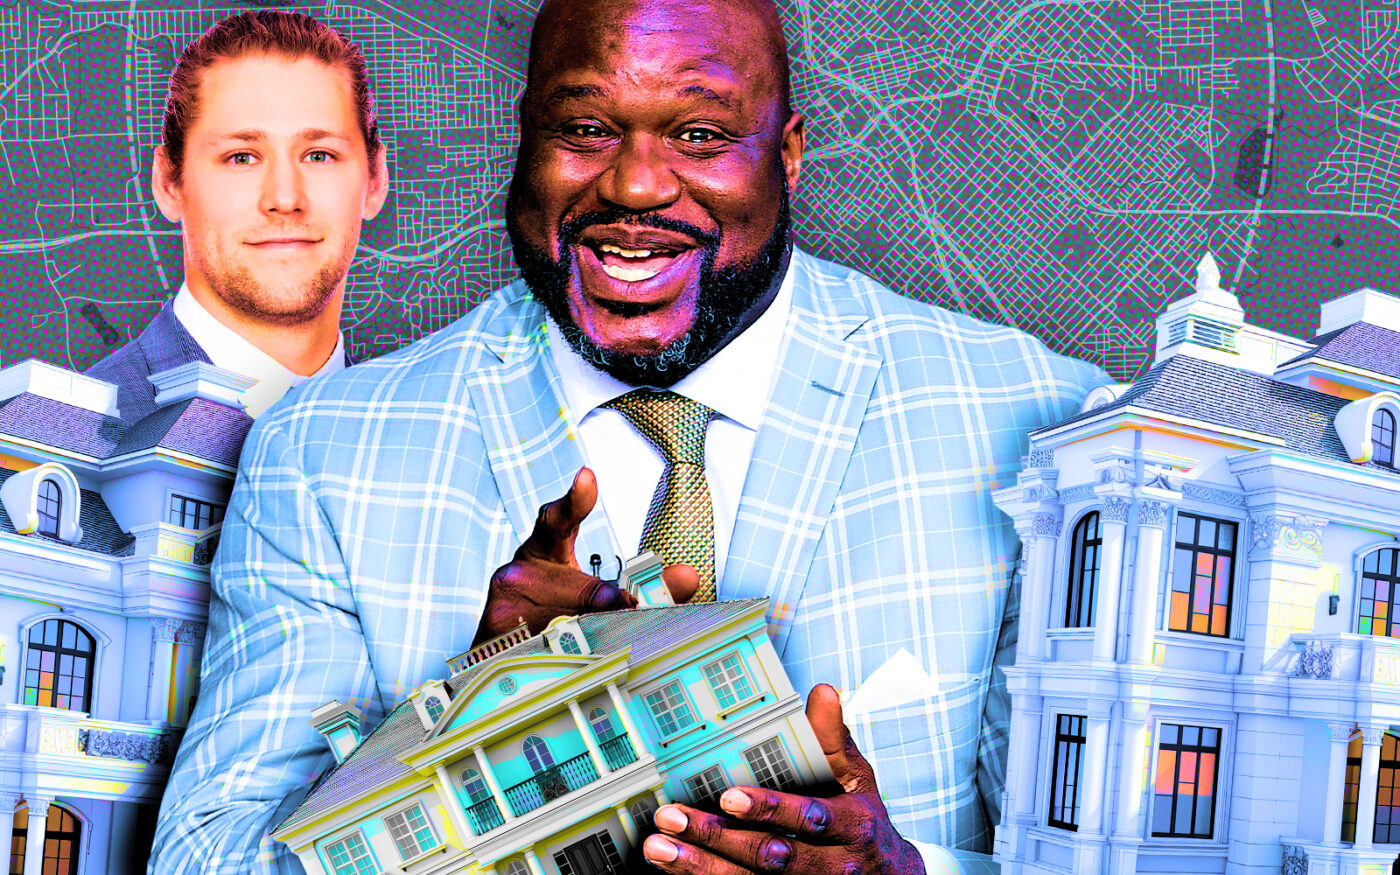 <p>From left: Rogers Healy and Associates Real Estate&#8217;s Zac Gideo and Shaquille O&#8217;Neal (Getty, Rogers Healy and Associates Real Estate)</p>
